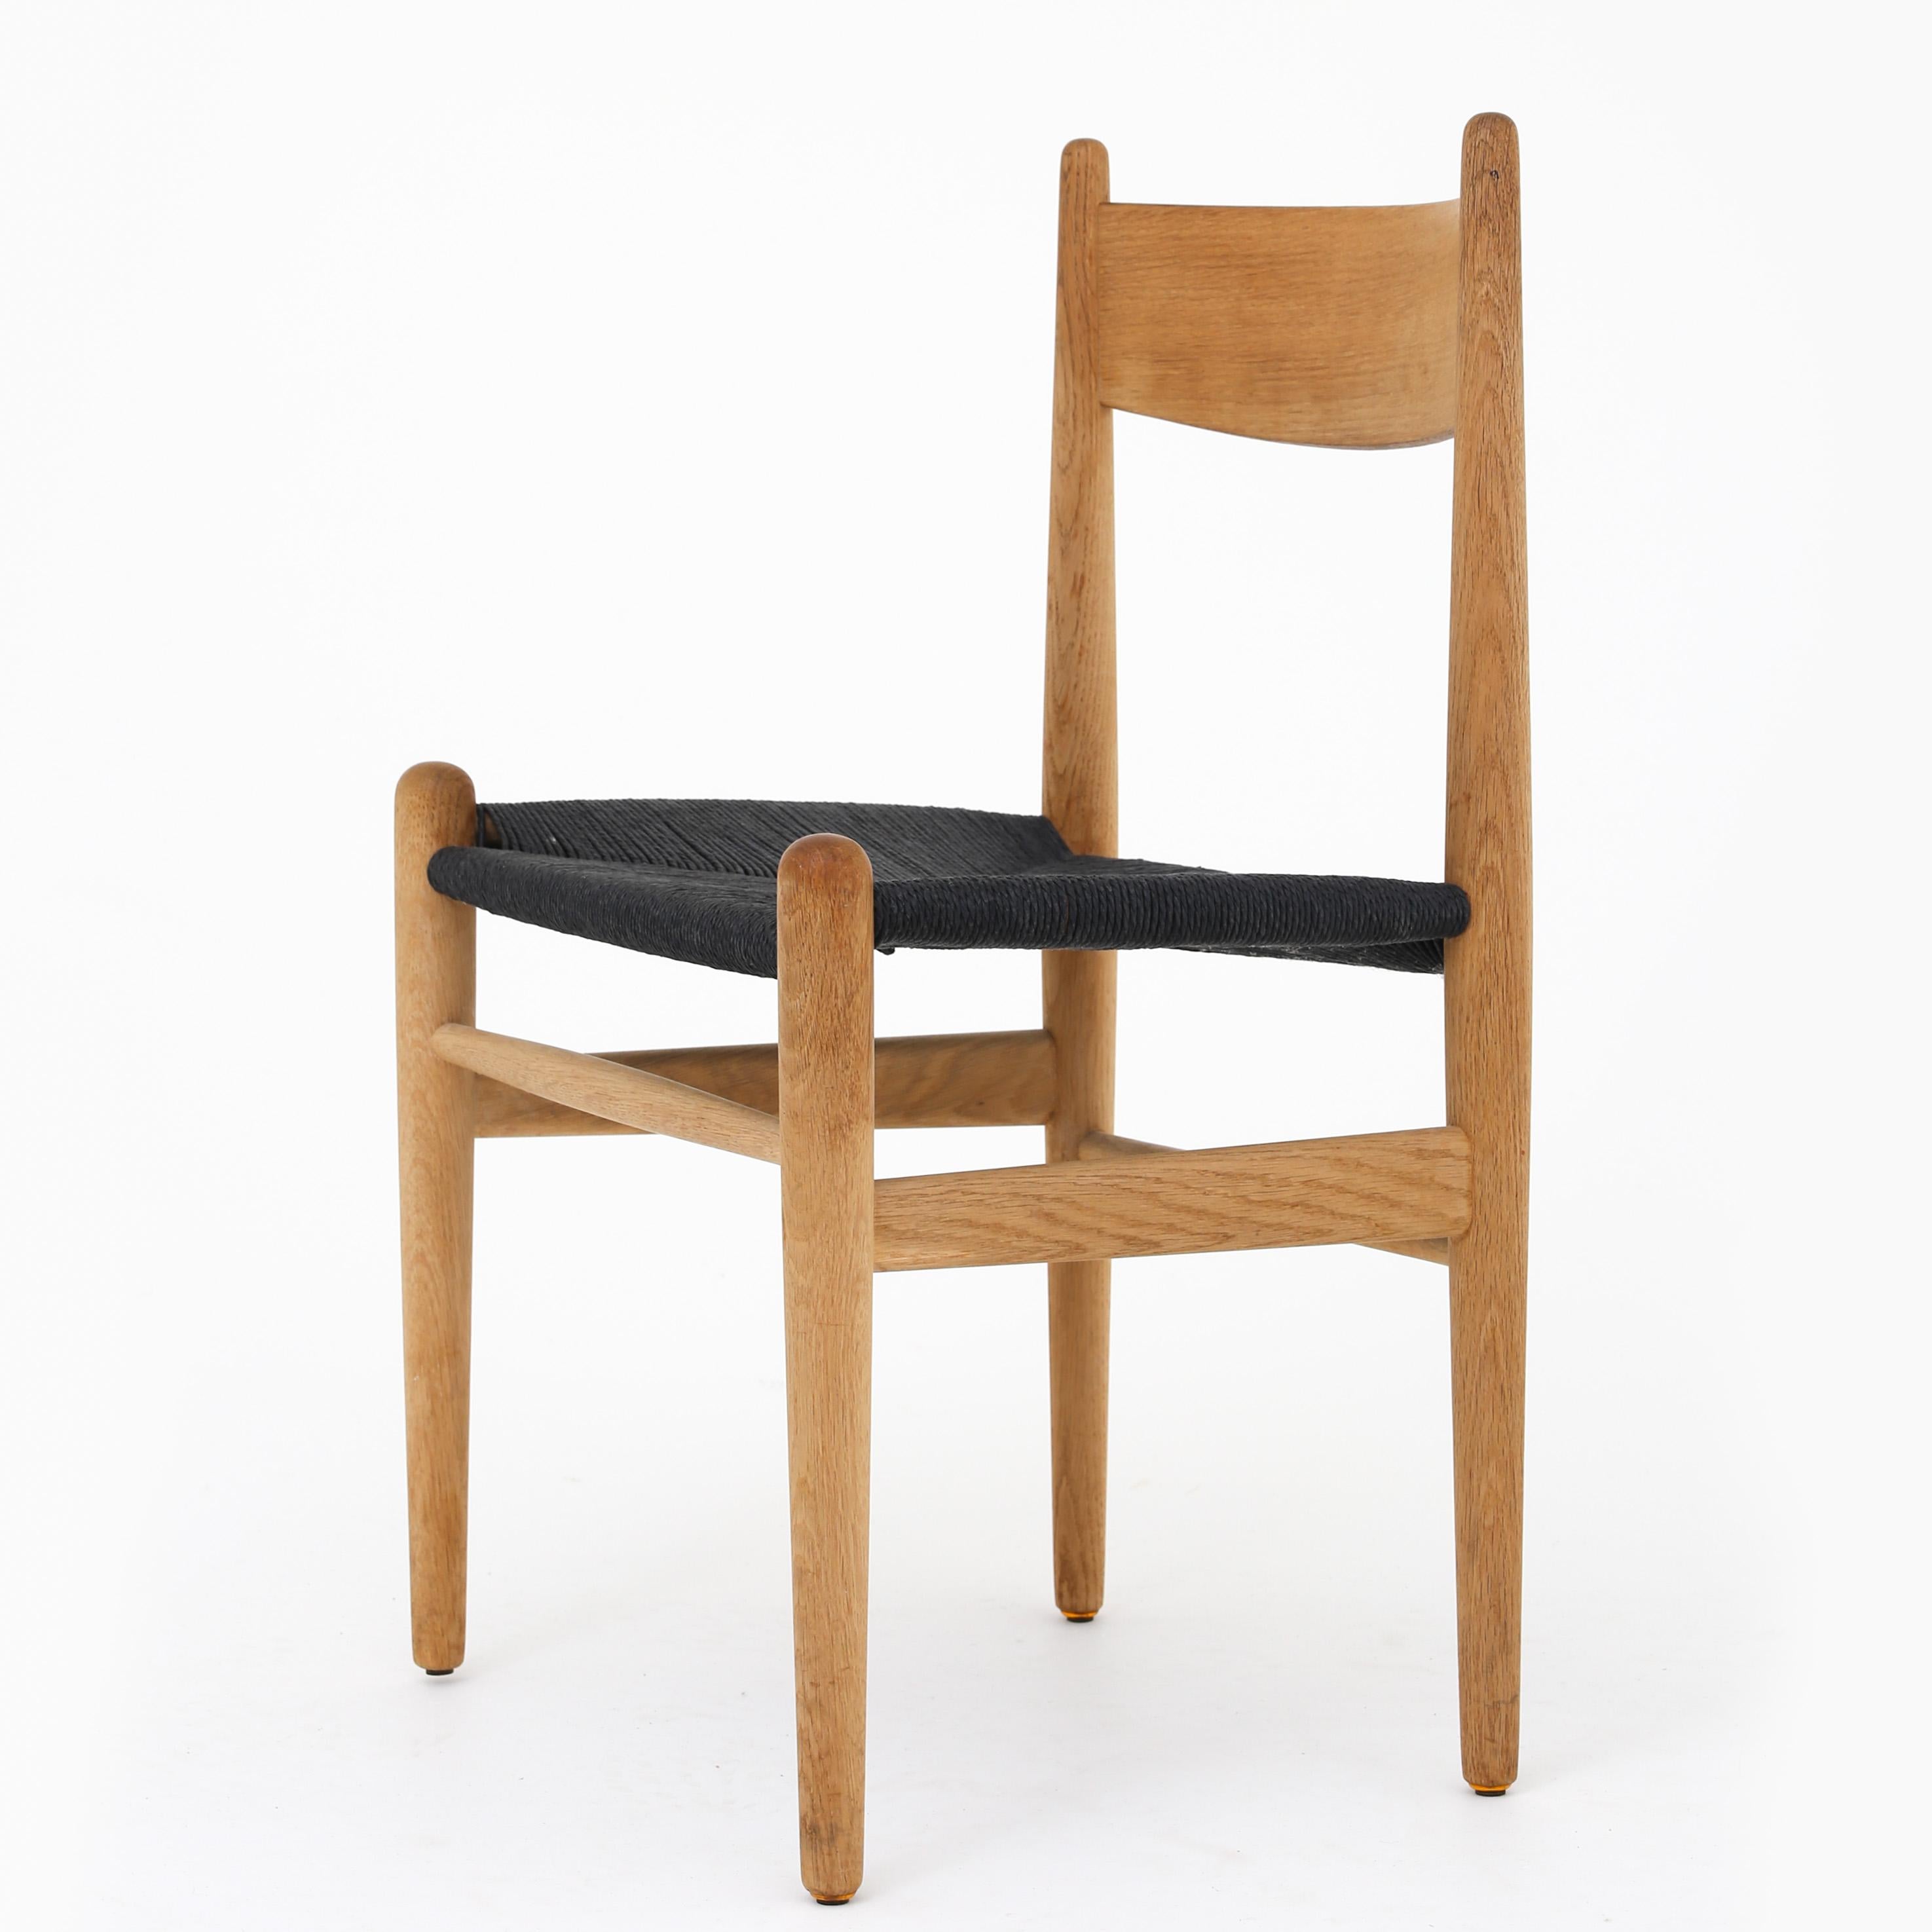 Hans J. Wegner / Carl Hansen & Son. CH 36 - set of 4 dining chairs in solid oak and black paper yarn. Designed in 1962.